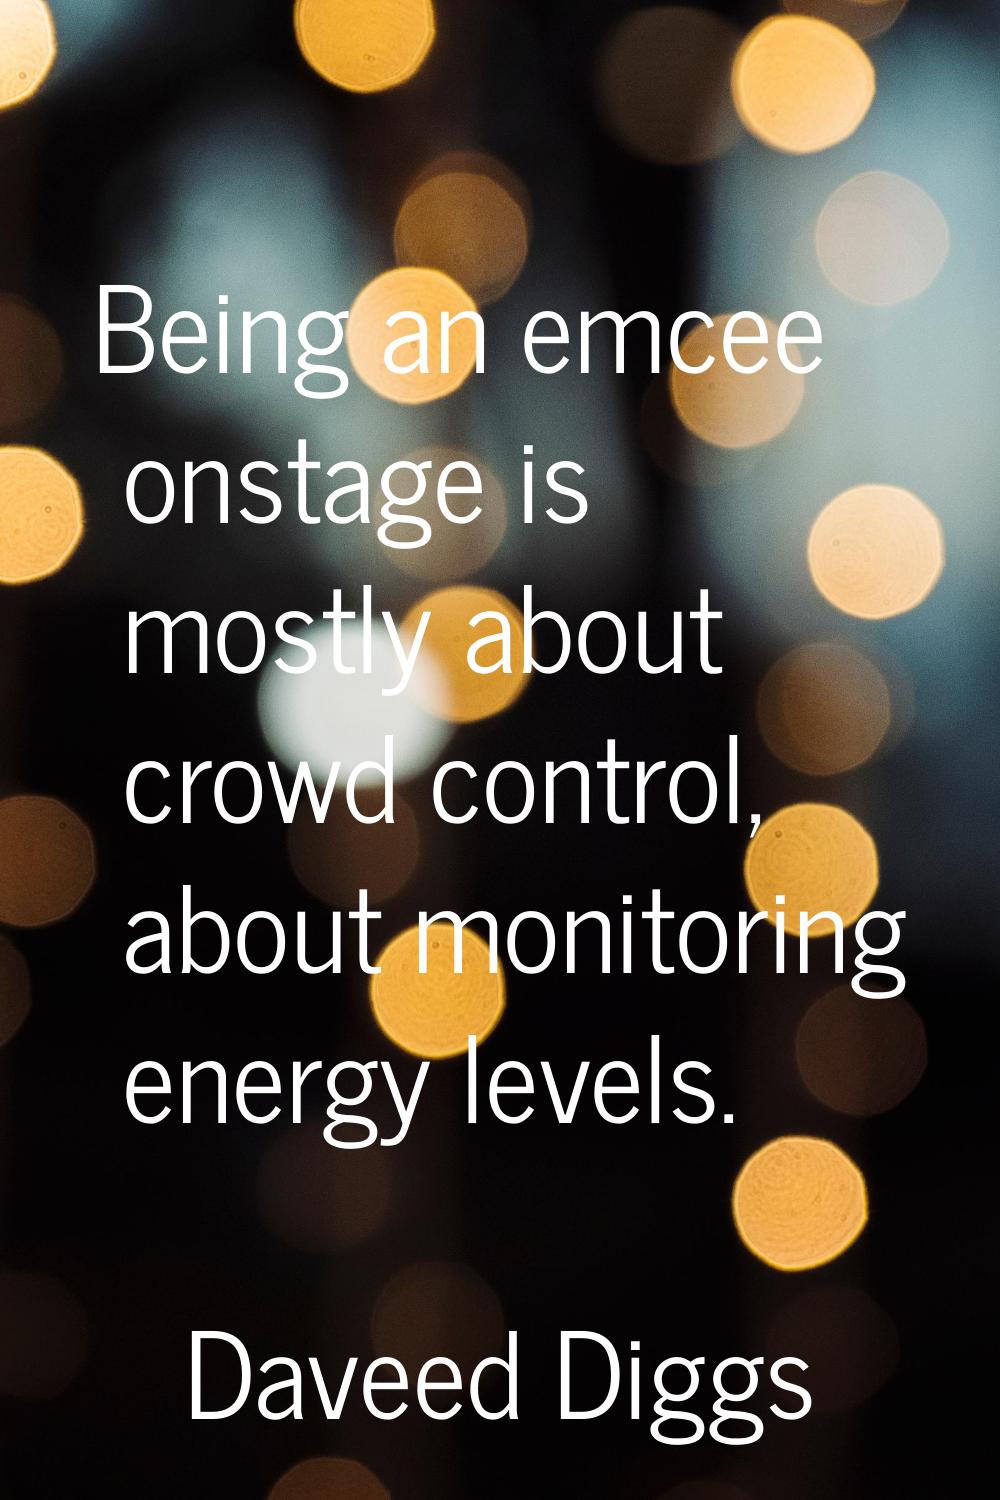 Being an emcee onstage is mostly about crowd control, about monitoring energy levels.